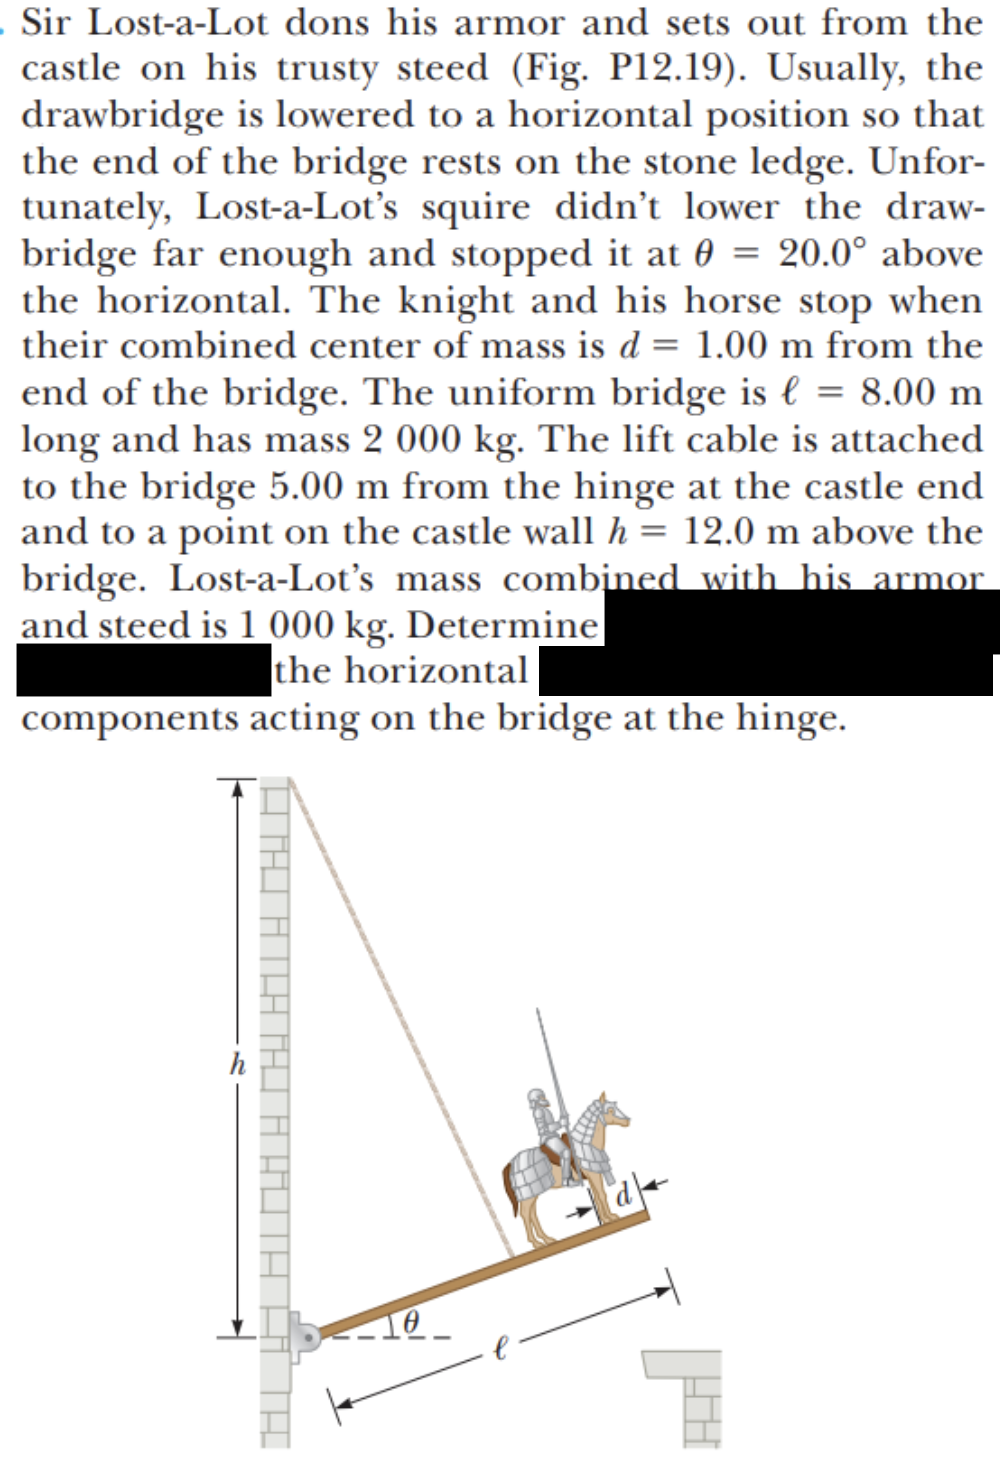 . Sir Lost-a-Lot dons his armor and sets out from the
castle on his trusty steed (Fig. P12.19). Usually, the
drawbridge is lowered to a horizontal position so that
the end of the bridge rests on the stone ledge. Unfor-
tunately, Lost-a-Lot's squire didn't lower the draw-
bridge far enough and stopped it at 0 = 20.0° above
the horizontal. The knight and his horse stop when
their combined center of mass is d = 1.00 m from the
end of the bridge. The uniform bridge is € = 8.00 m
long and has mass 2 000 kg. The lift cable is attached
to the bridge 5.00 m from the hinge at the castle end
and to a point on the castle wall h = 12.0 m above the
bridge. Lost-a-Lot's mass combined with his armor
and steed is 1 000 kg. Determine
the horizontal
components acting on the bridge at the hinge.
h
